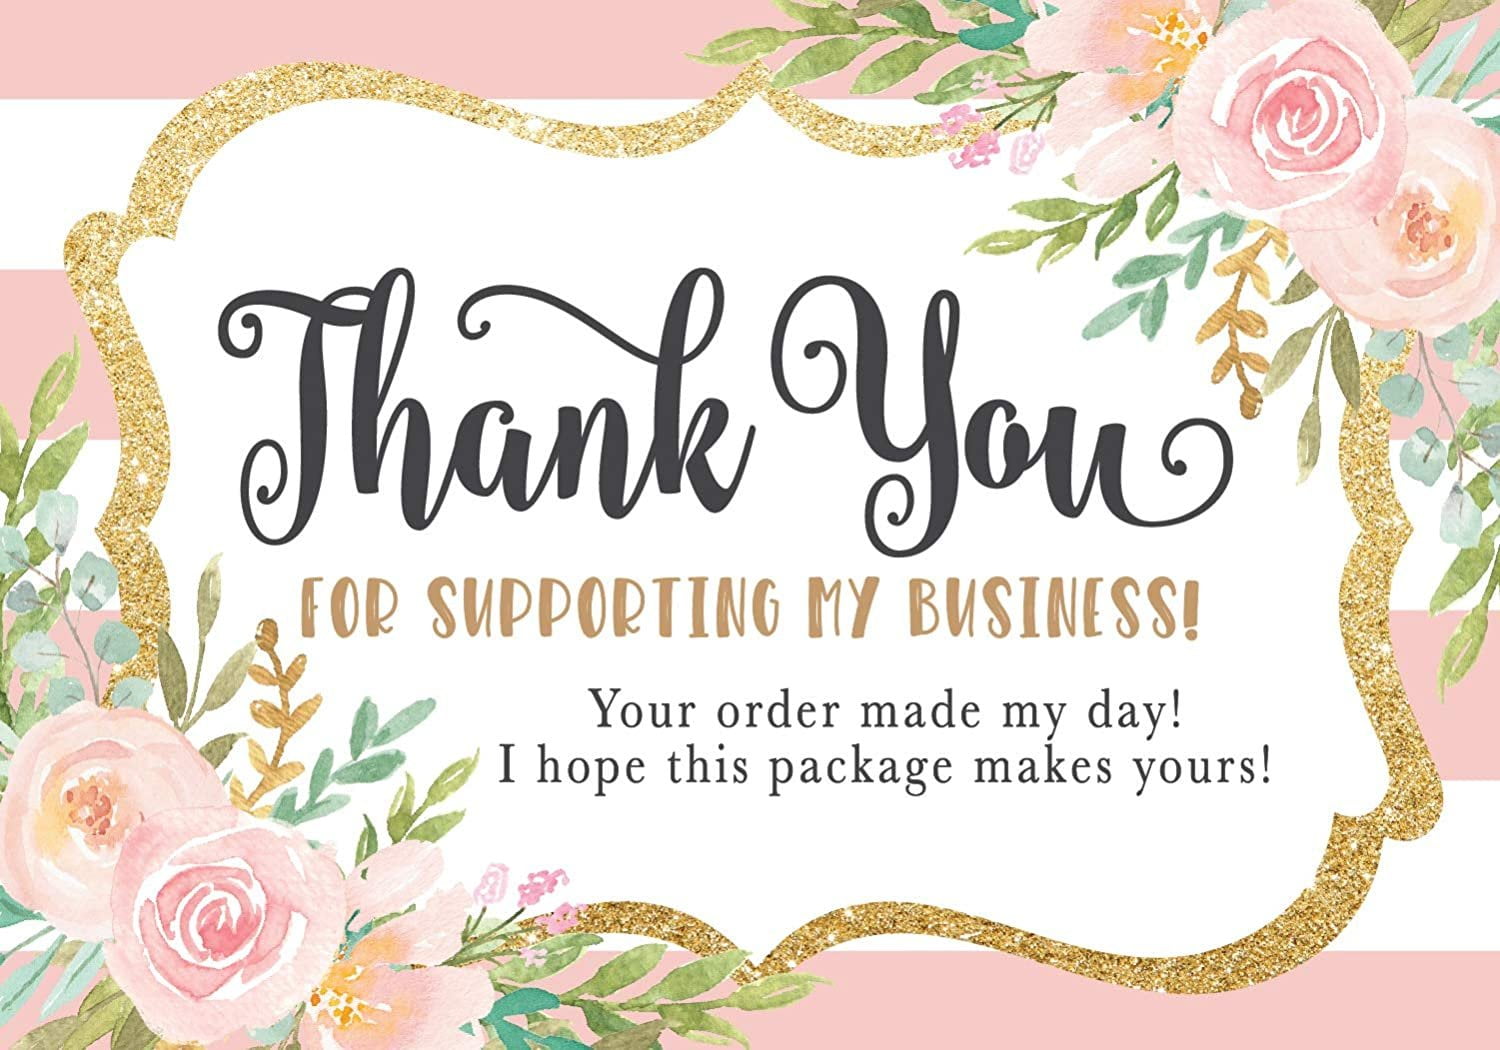 25 Pink Gold Floral Thank You Cards For Small Business We Appreciate You Supporting My Business Customer Appreciation Note Cards Mini Thanks You Made My Day Pretty Purchase Order Inserts 3 5x5